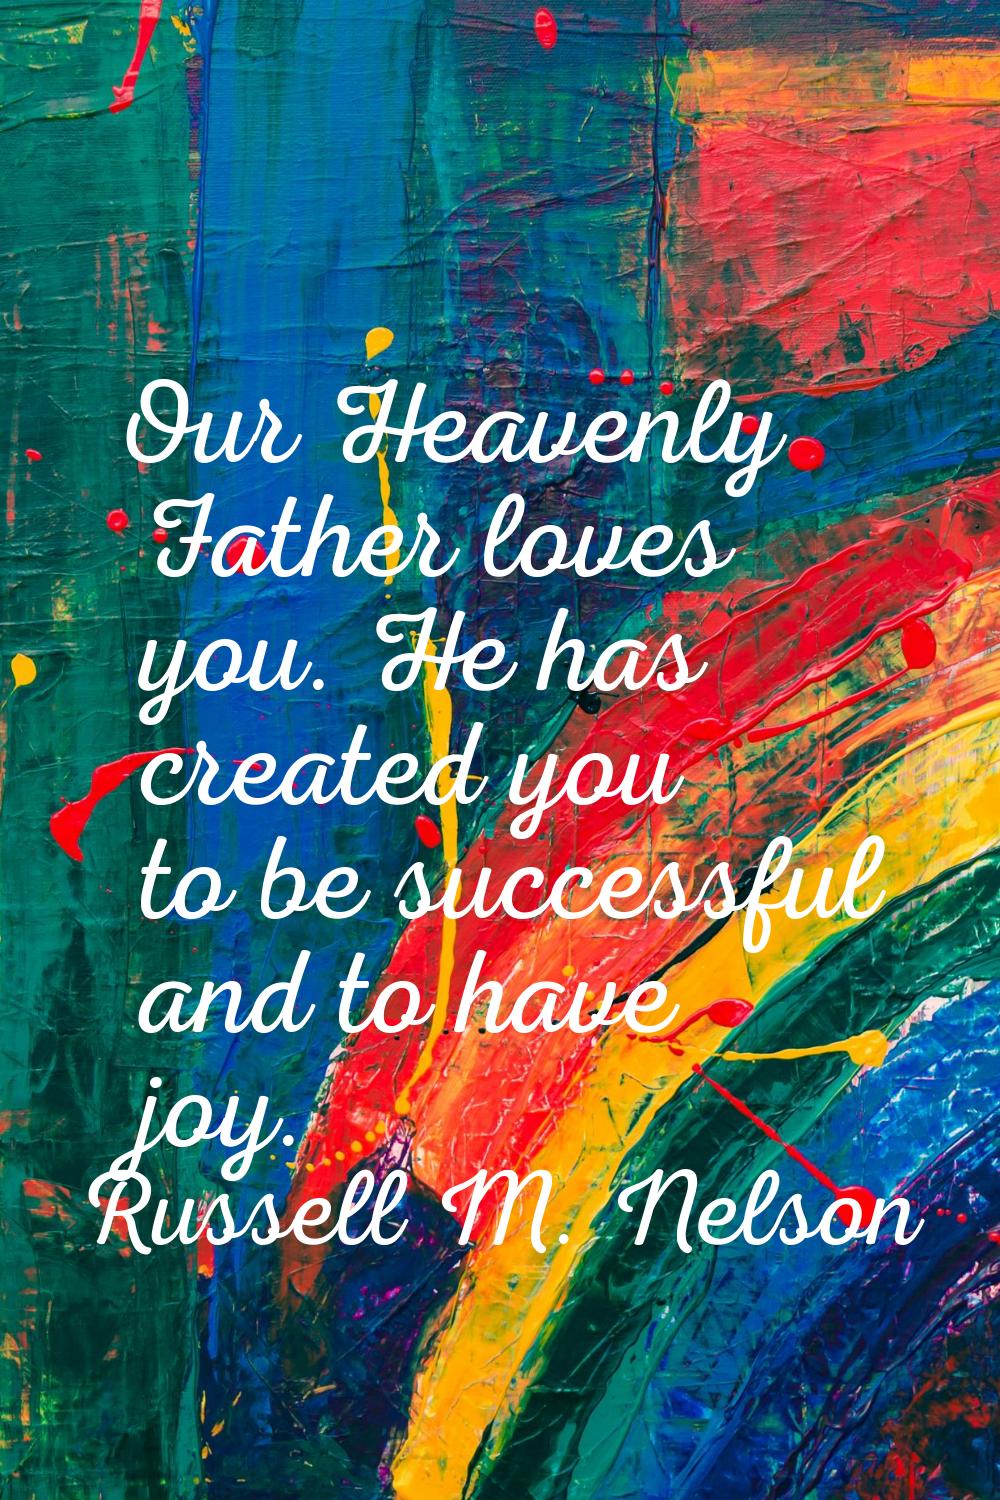 Our Heavenly Father loves you. He has created you to be successful and to have joy.